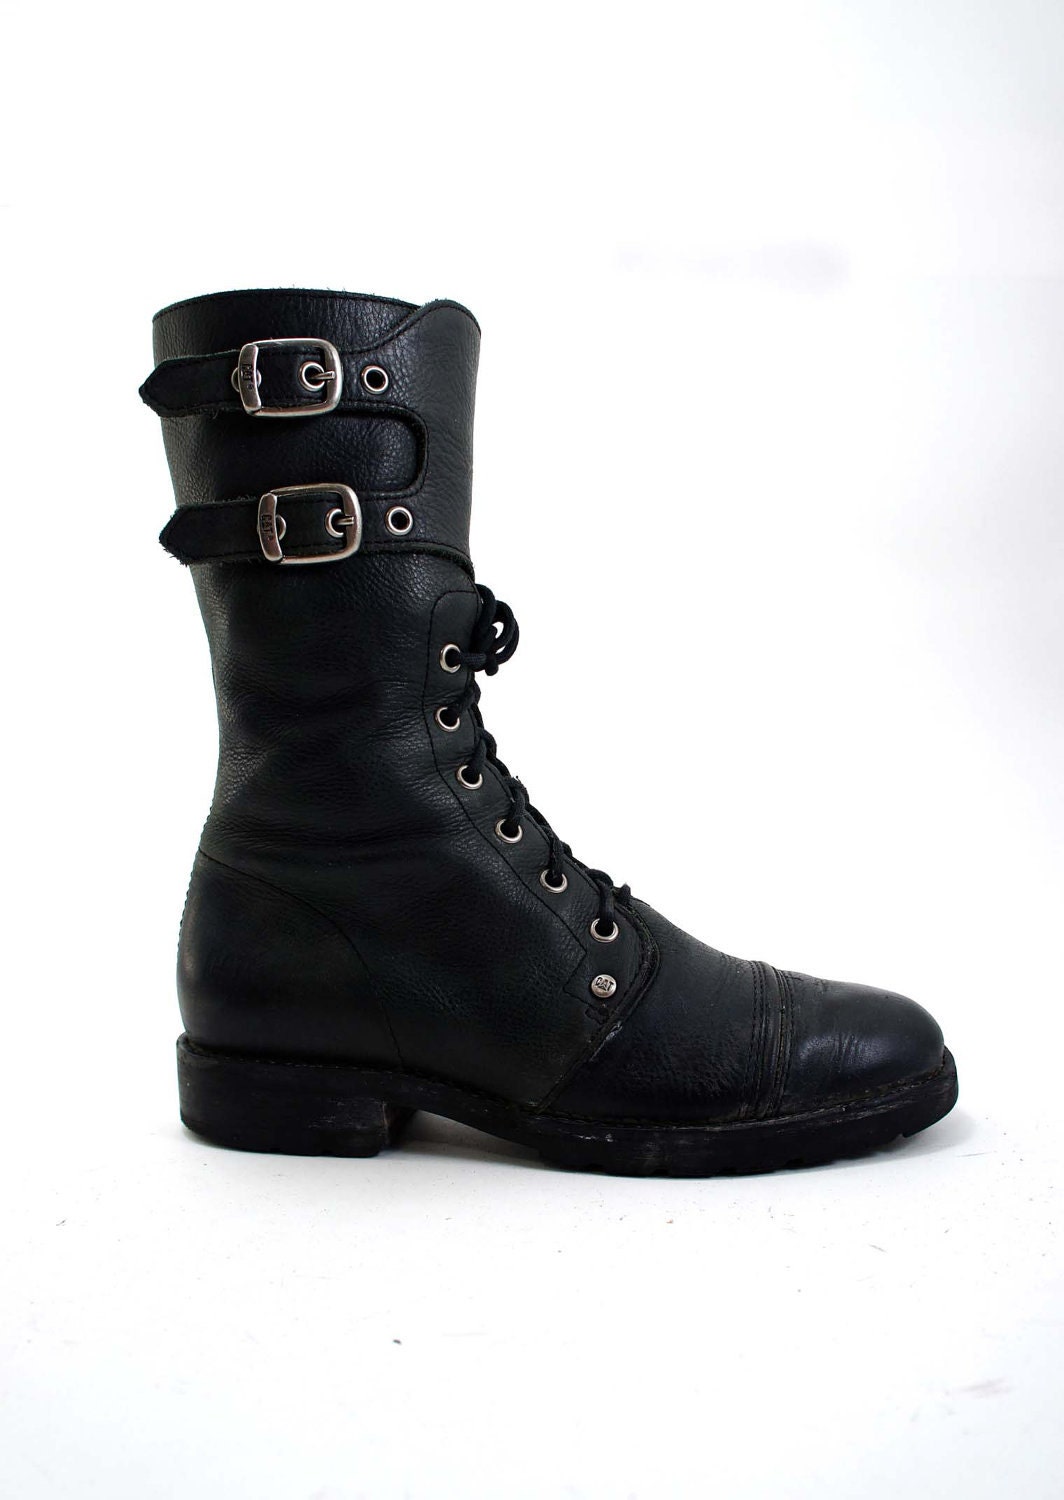 Vintage CAT Combat Boot Style Calf High Black by NashDryGoods